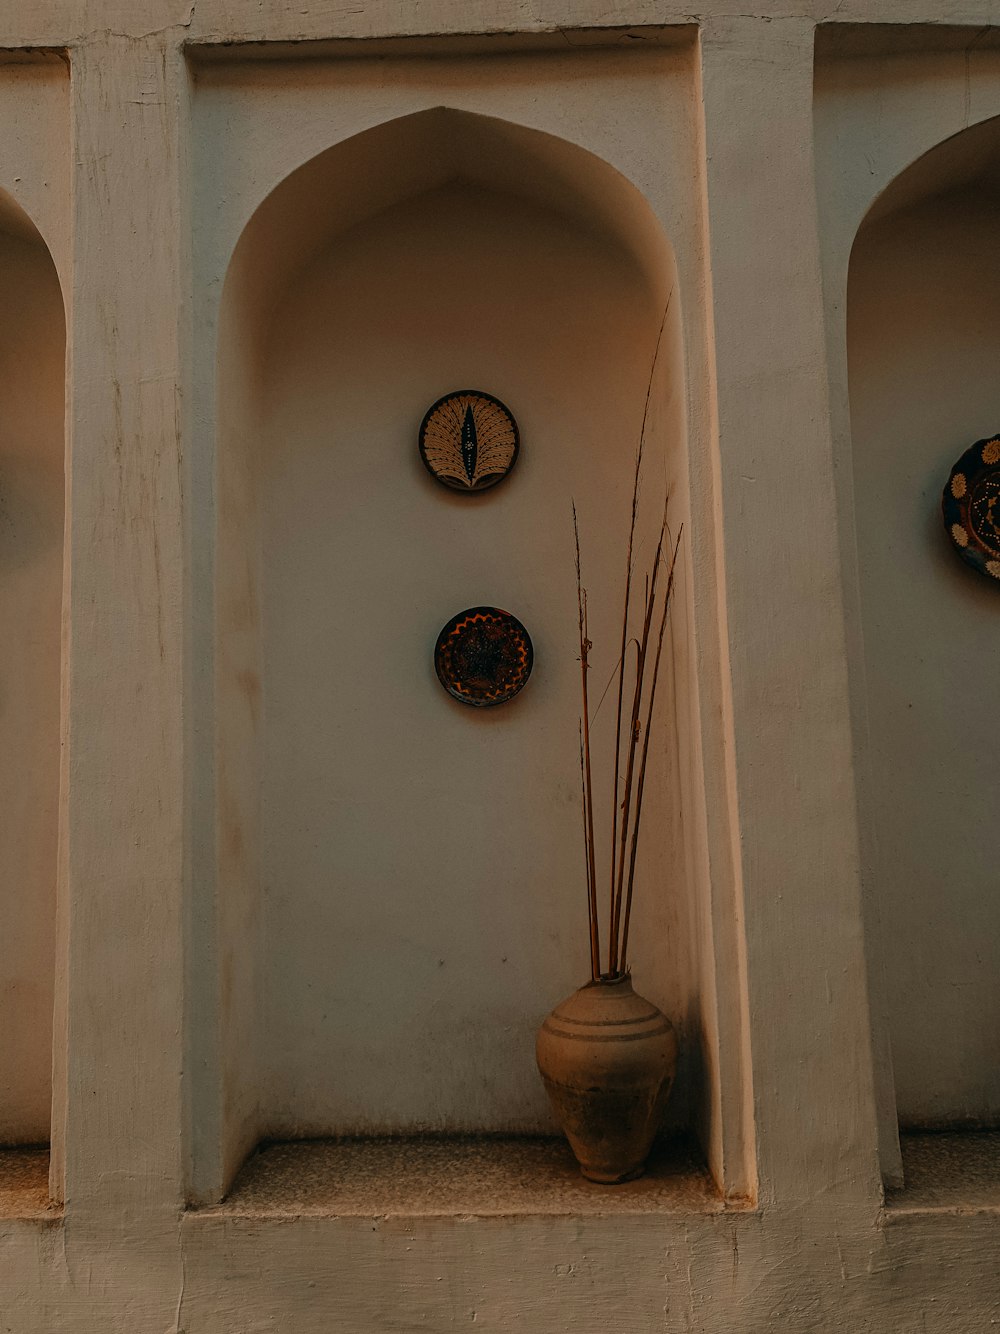 a vase with a plant in it next to a wall with clocks on it